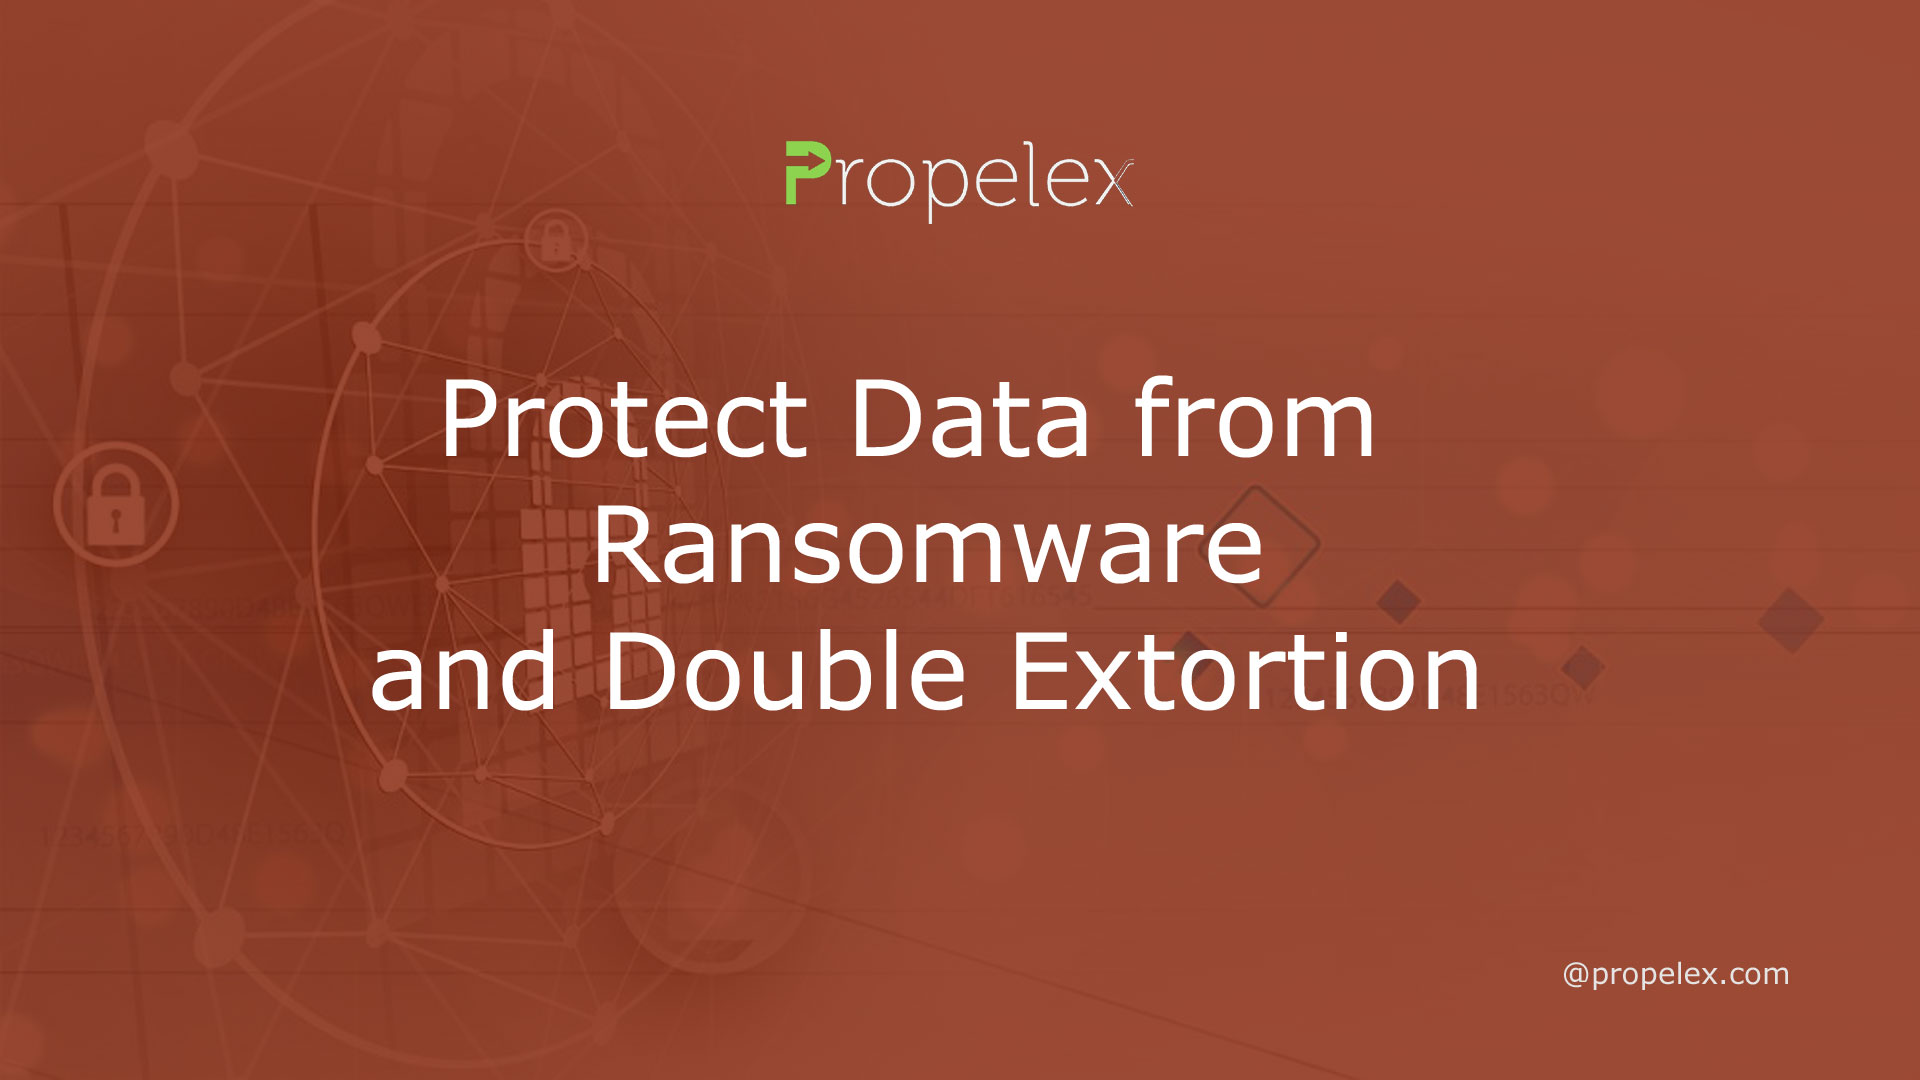 Protect Data from Ransomware and Double Extortion